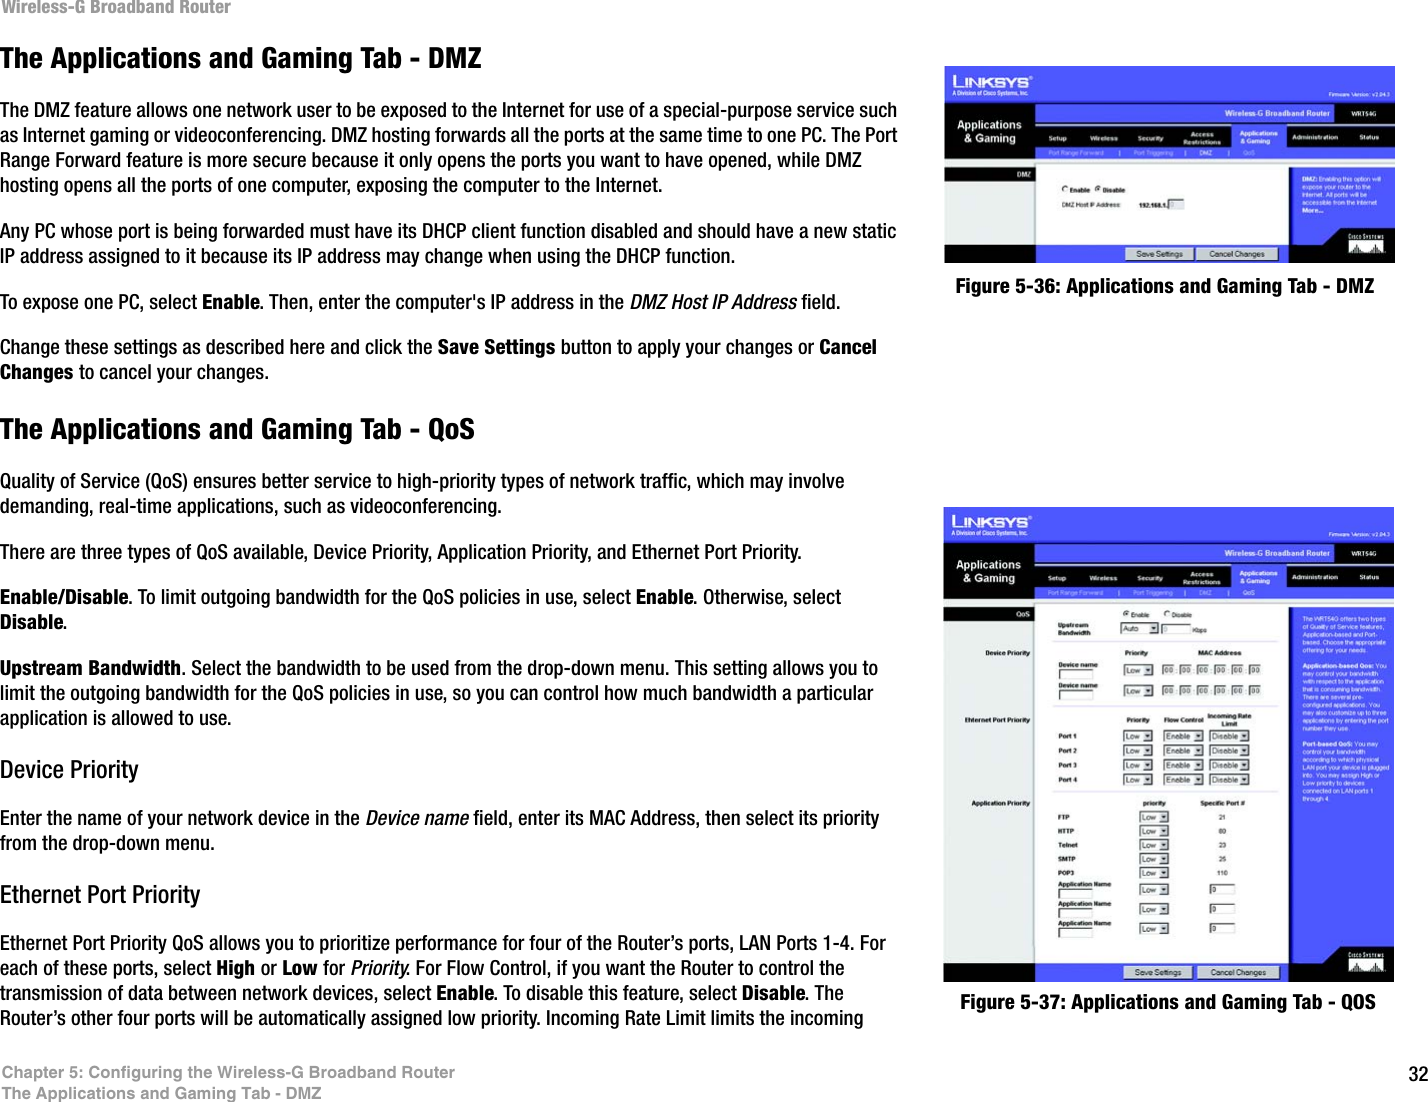 32Chapter 5: Configuring the Wireless-G Broadband RouterThe Applications and Gaming Tab - DMZWireless-G Broadband RouterFigure 5-36: Applications and Gaming Tab - DMZThe Applications and Gaming Tab - DMZThe DMZ feature allows one network user to be exposed to the Internet for use of a special-purpose service such as Internet gaming or videoconferencing. DMZ hosting forwards all the ports at the same time to one PC. The Port Range Forward feature is more secure because it only opens the ports you want to have opened, while DMZ hosting opens all the ports of one computer, exposing the computer to the Internet. Any PC whose port is being forwarded must have its DHCP client function disabled and should have a new static IP address assigned to it because its IP address may change when using the DHCP function.To expose one PC, select Enable. Then, enter the computer&apos;s IP address in the DMZ Host IP Address field.Change these settings as described here and click the Save Settings button to apply your changes or Cancel Changes to cancel your changes. The Applications and Gaming Tab - QoSQuality of Service (QoS) ensures better service to high-priority types of network traffic, which may involve demanding, real-time applications, such as videoconferencing. There are three types of QoS available, Device Priority, Application Priority, and Ethernet Port Priority.Enable/Disable. To limit outgoing bandwidth for the QoS policies in use, select Enable. Otherwise, select Disable.Upstream Bandwidth. Select the bandwidth to be used from the drop-down menu. This setting allows you to limit the outgoing bandwidth for the QoS policies in use, so you can control how much bandwidth a particular application is allowed to use.Device PriorityEnter the name of your network device in the Device name field, enter its MAC Address, then select its priority from the drop-down menu.Ethernet Port PriorityEthernet Port Priority QoS allows you to prioritize performance for four of the Router’s ports, LAN Ports 1-4. For each of these ports, select High or Low for Priority. For Flow Control, if you want the Router to control the transmission of data between network devices, select Enable. To disable this feature, select Disable. The Router’s other four ports will be automatically assigned low priority. Incoming Rate Limit limits the incoming  Figure 5-37: Applications and Gaming Tab - QOS